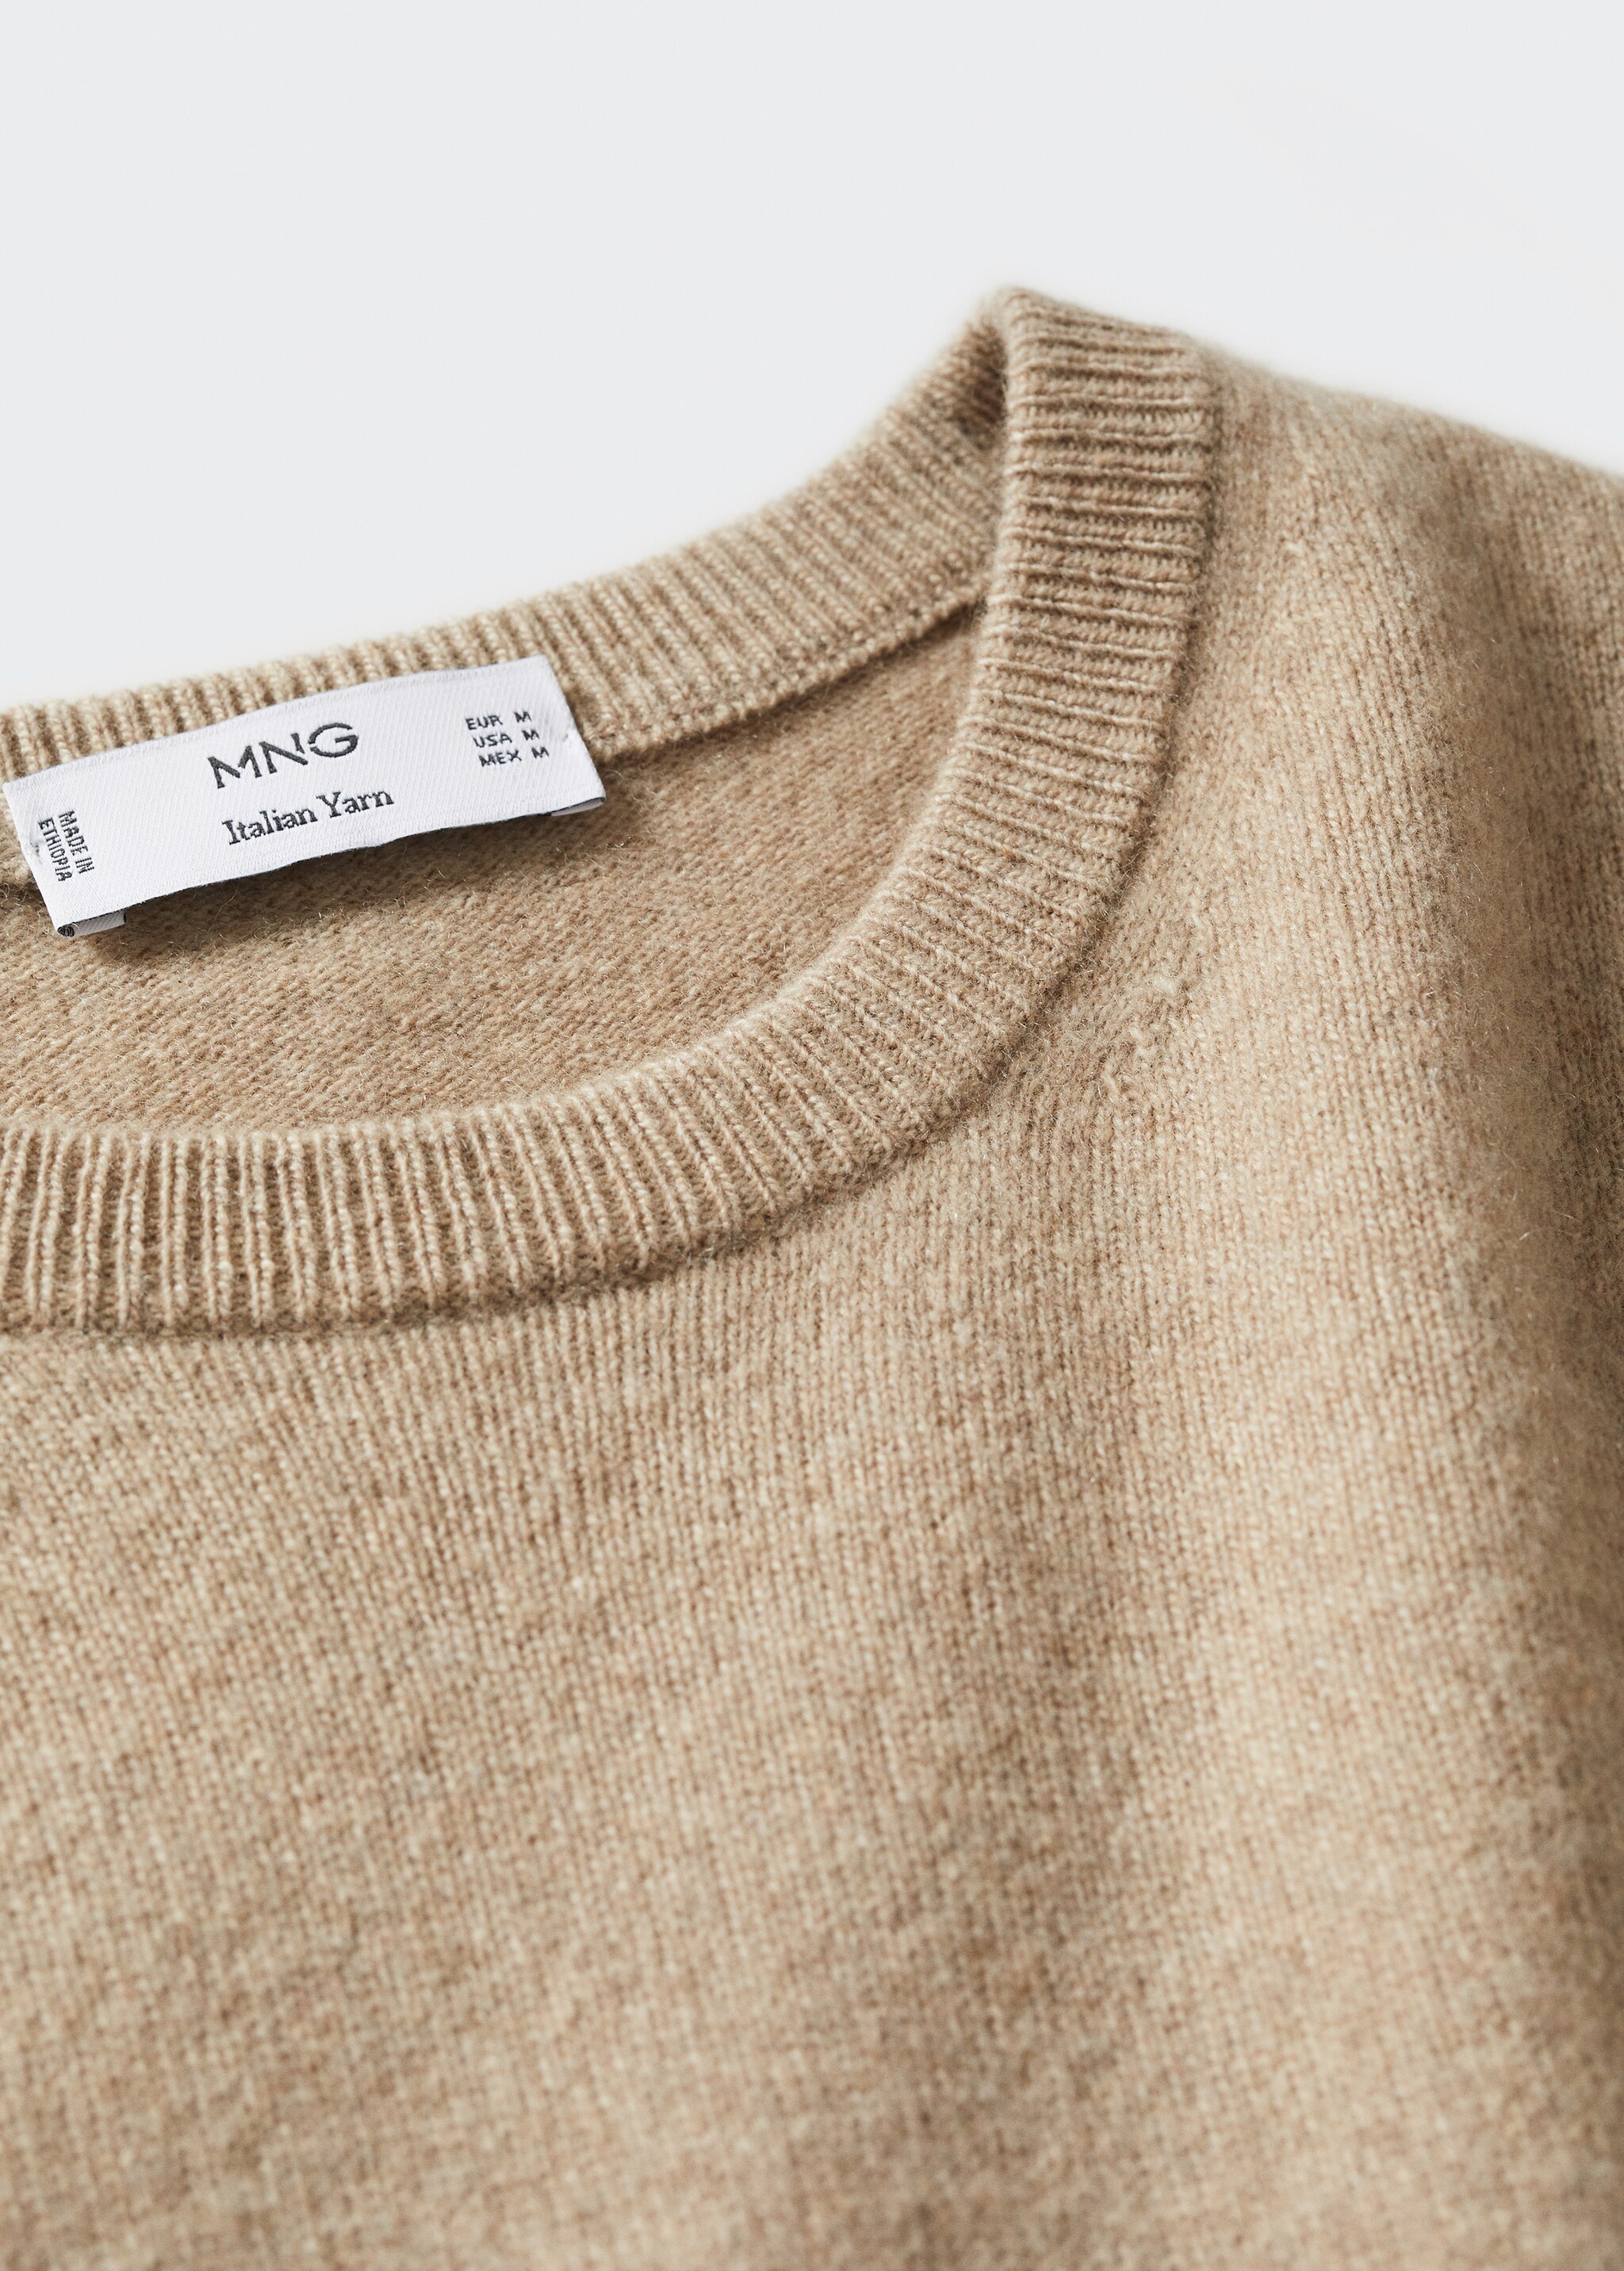 Cashmere jersey - Details of the article 8